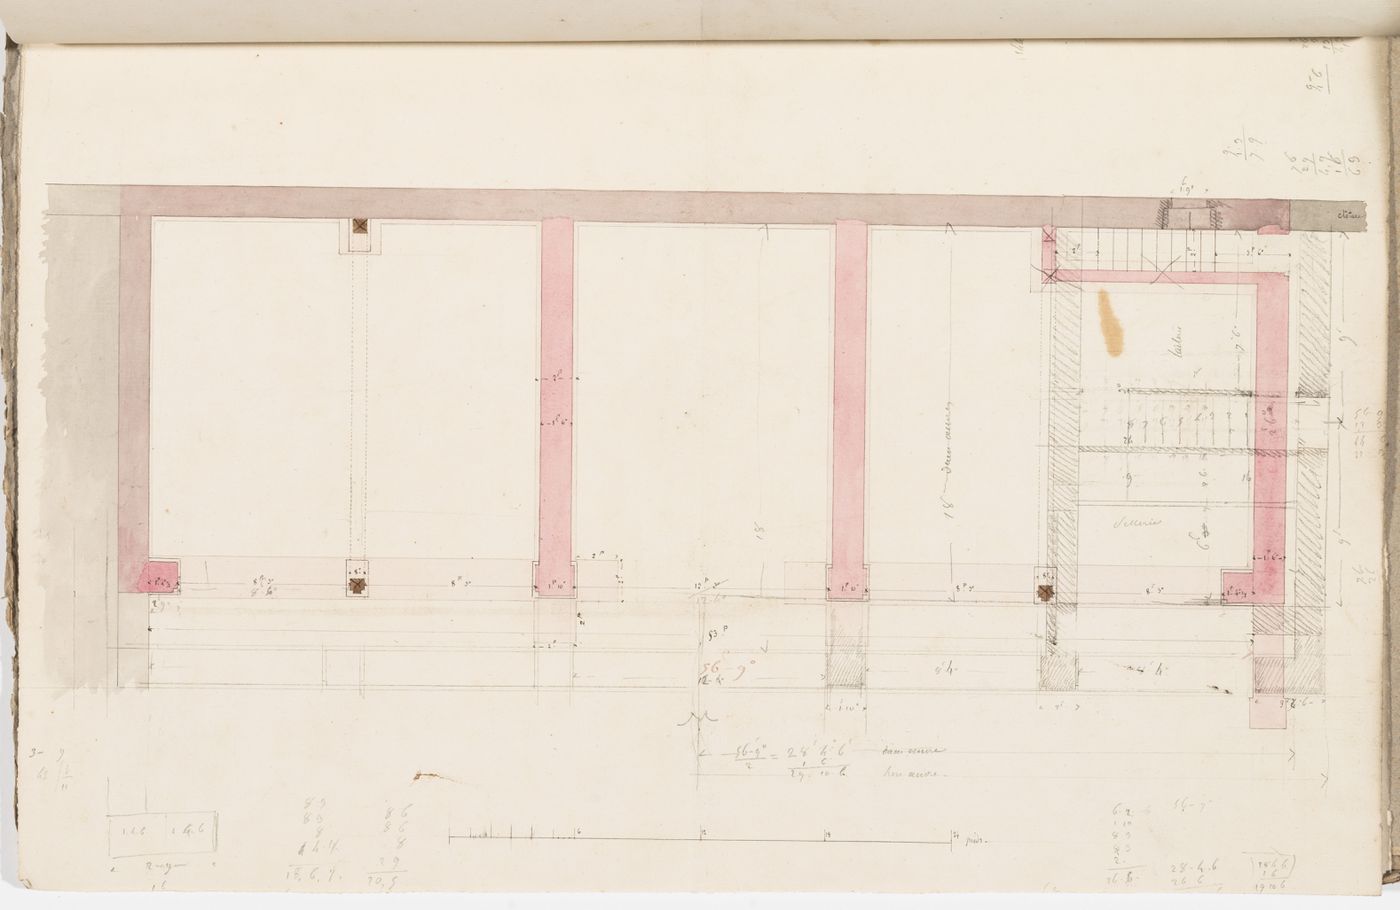 Plan for a stable and granary [?], probably for comte Treilhard